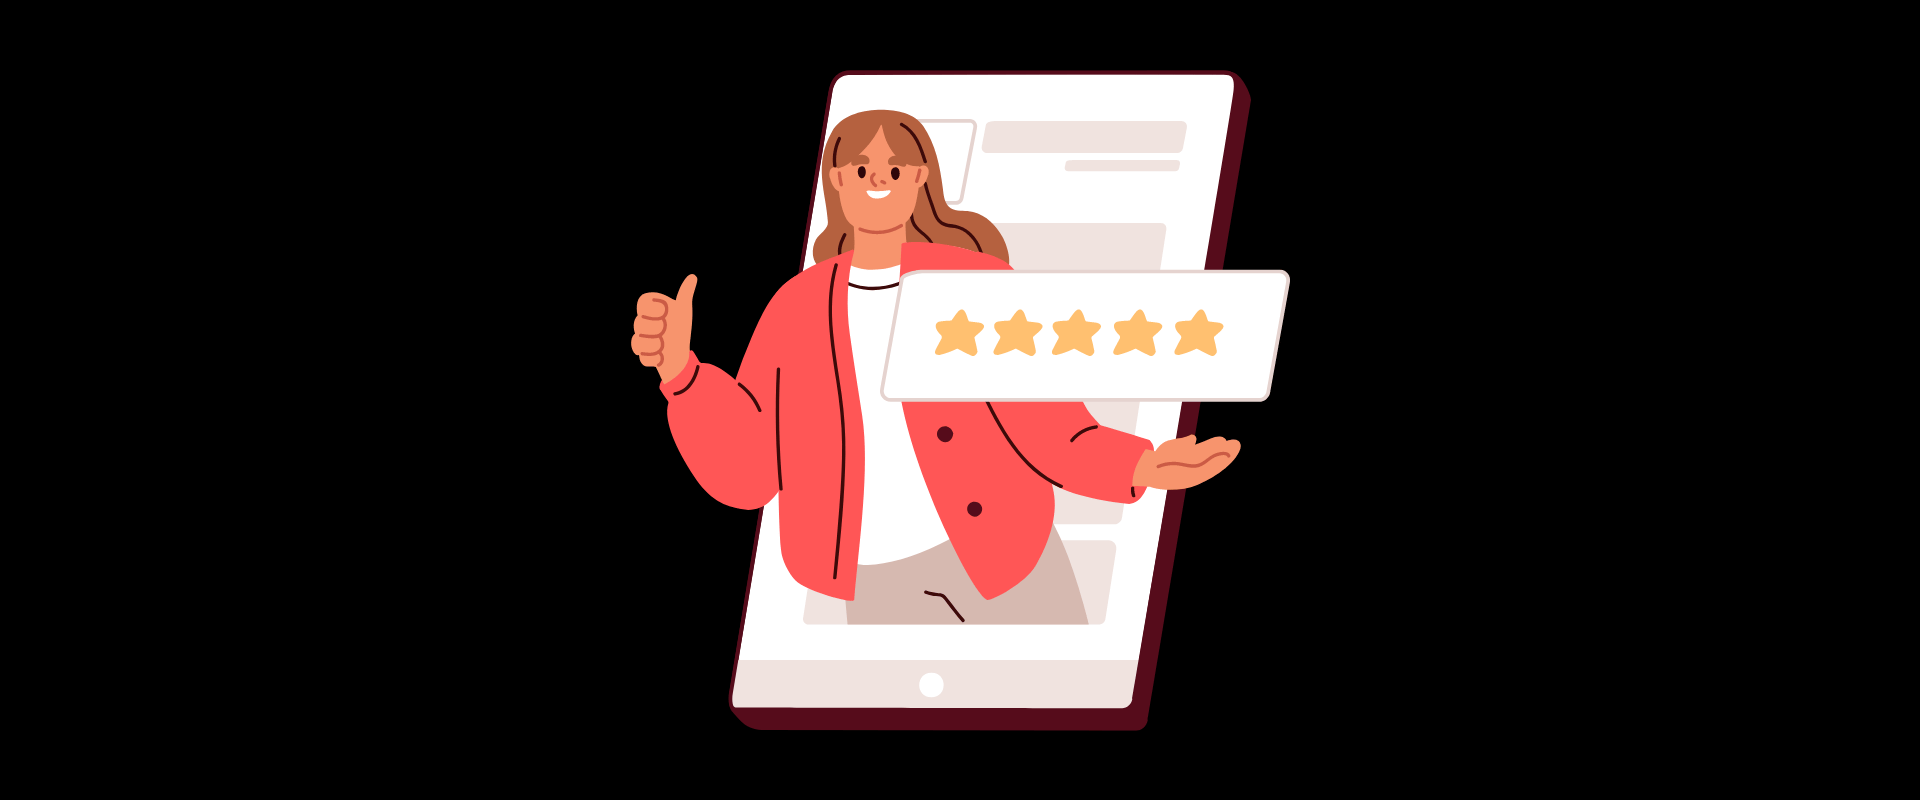 Write A Great Review